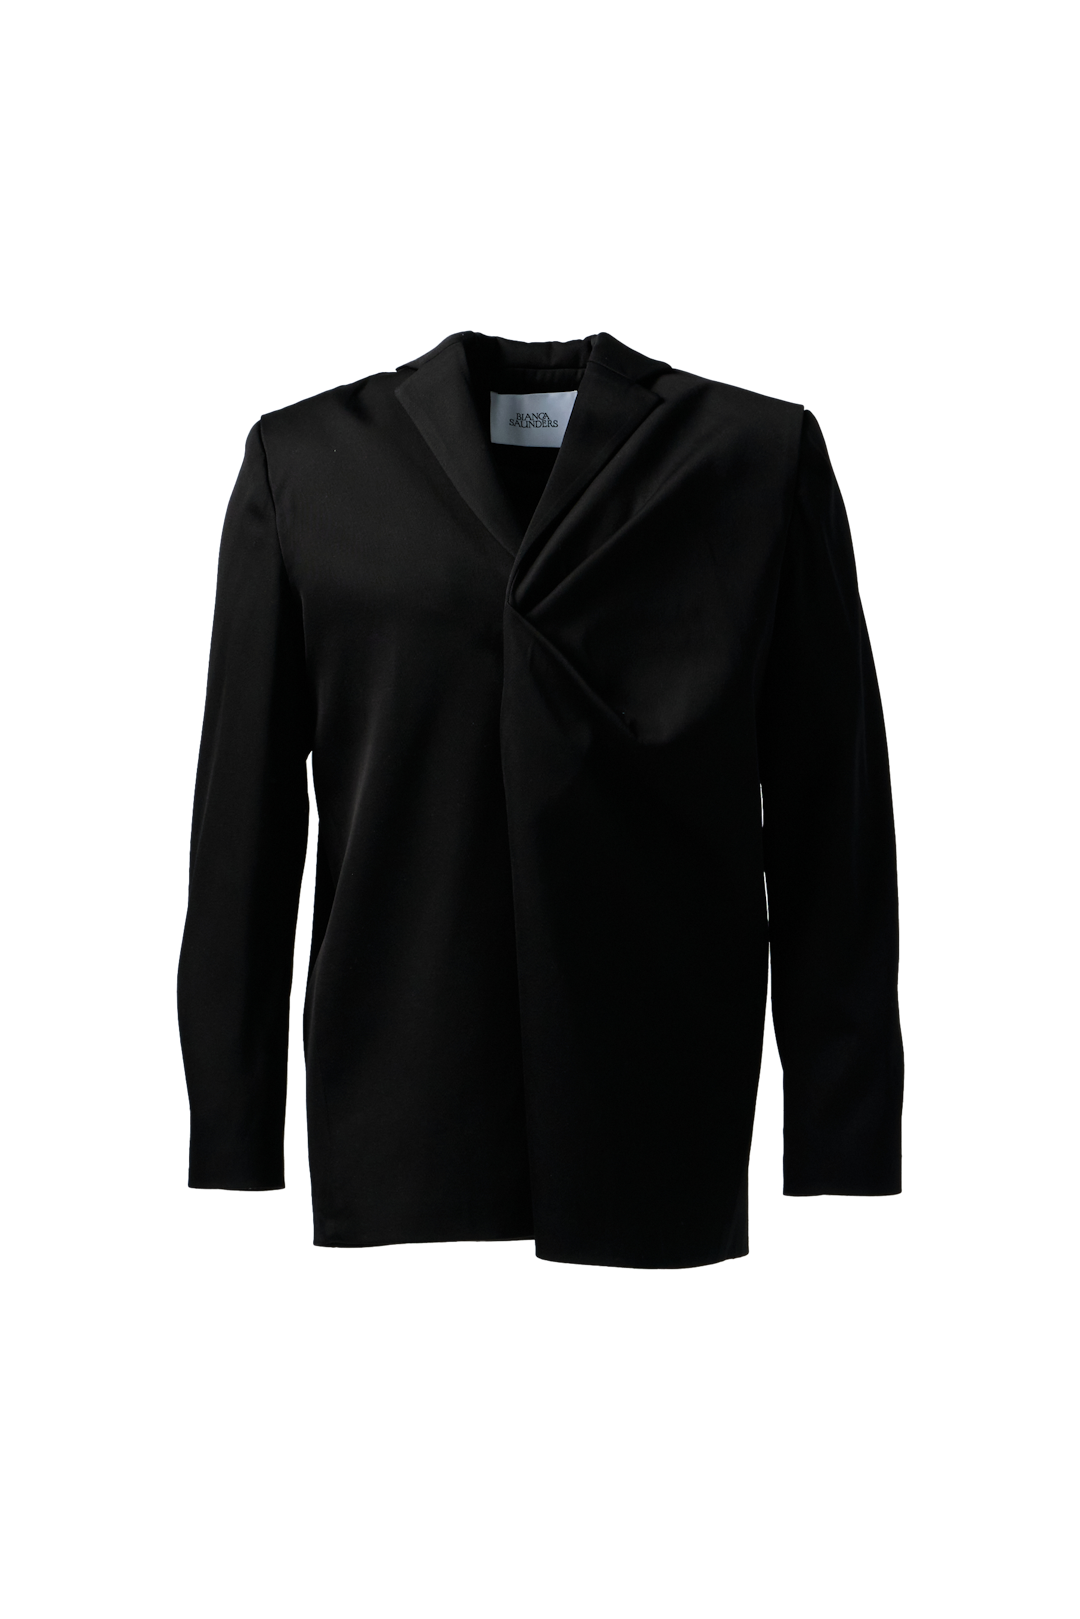 BIANCA SAUNDERS - Pinched Suit Jacket product image